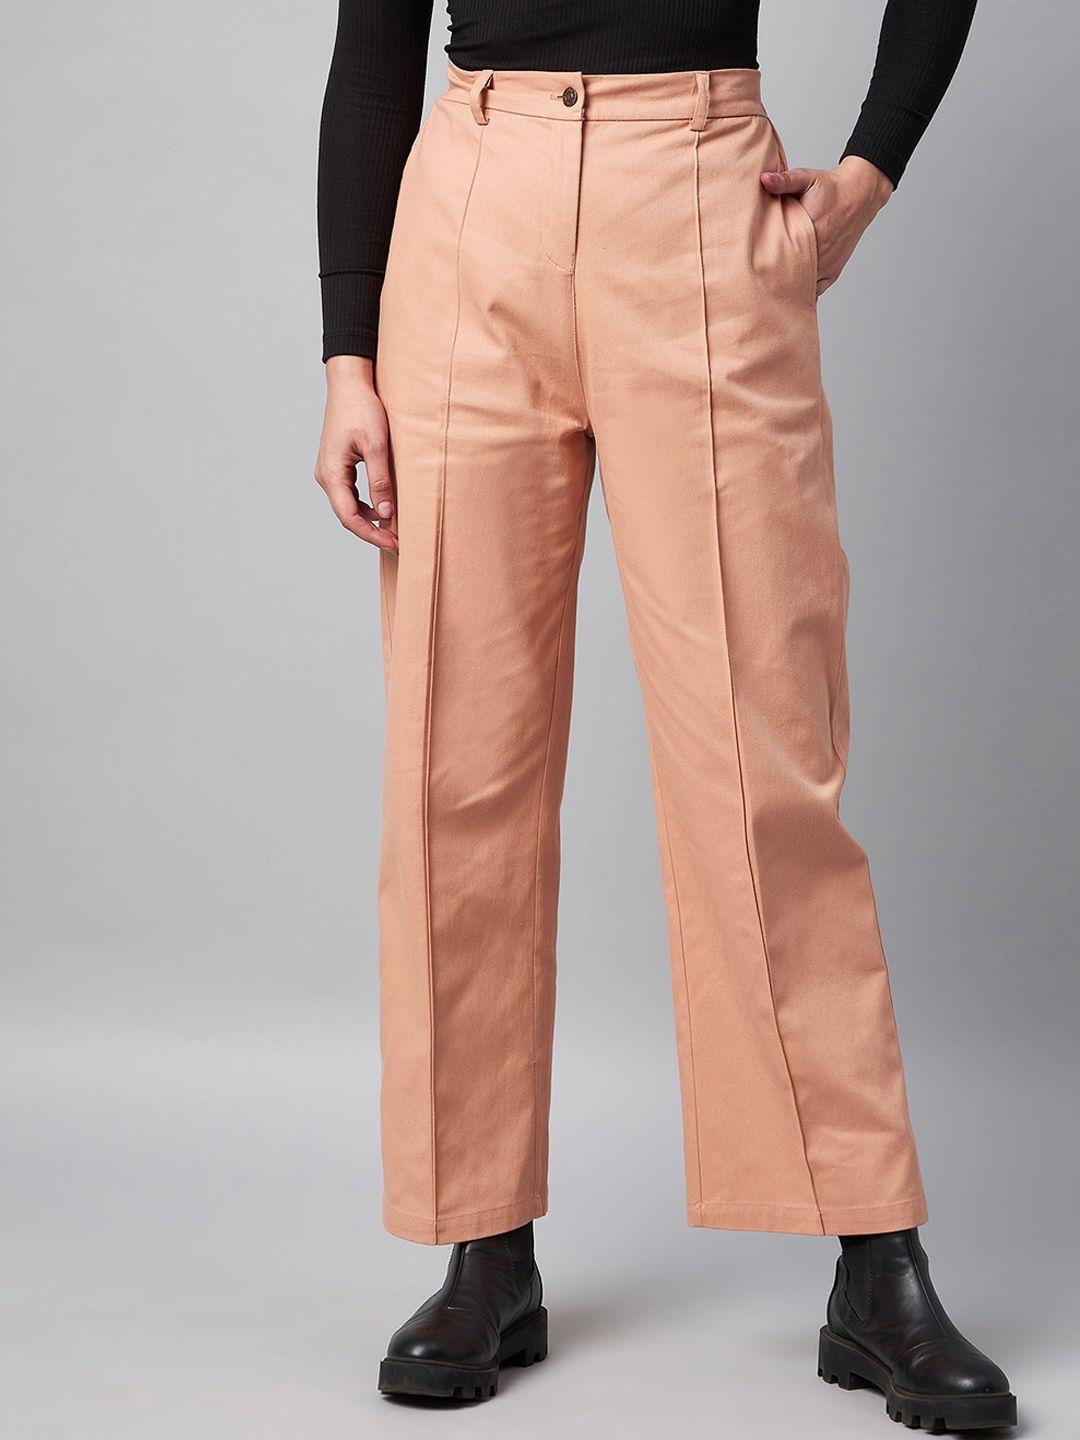 orchid-hues-women-peach-coloured-tailored-straight-high-rise-pleated-pure-cotton-trousers